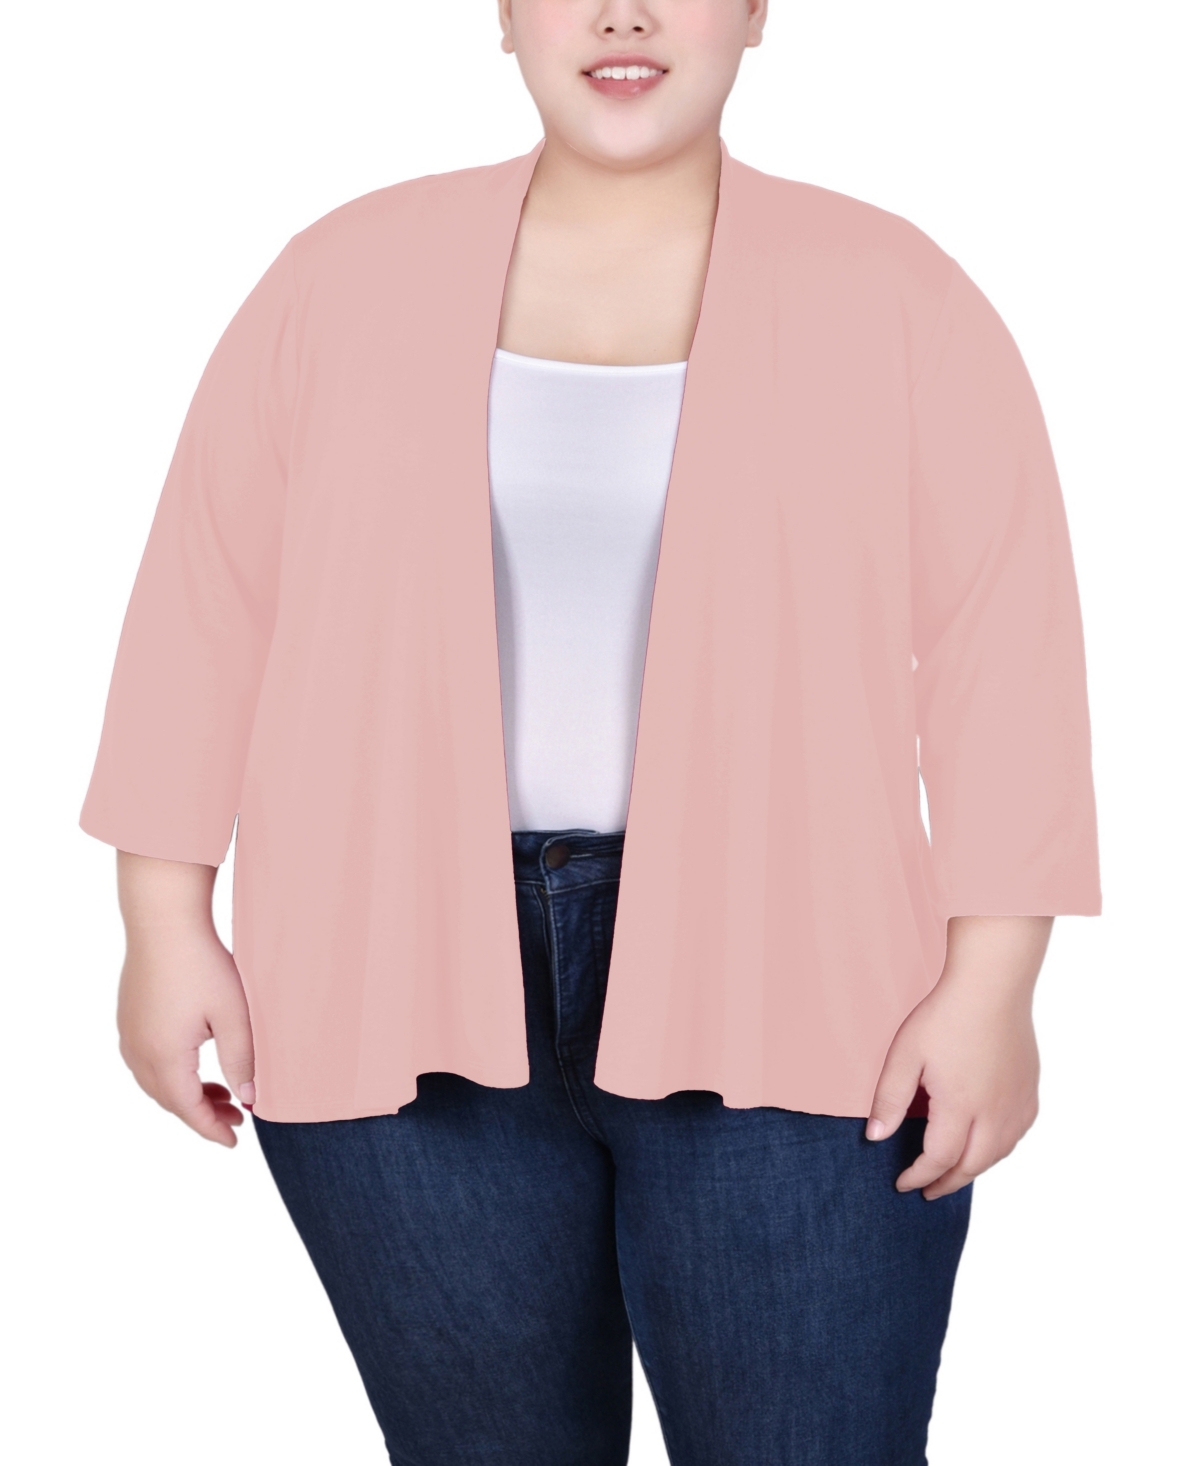 NY COLLECTION PLUS SIZE DRAPED OPEN-FRONT CARDIGAN SWEATER